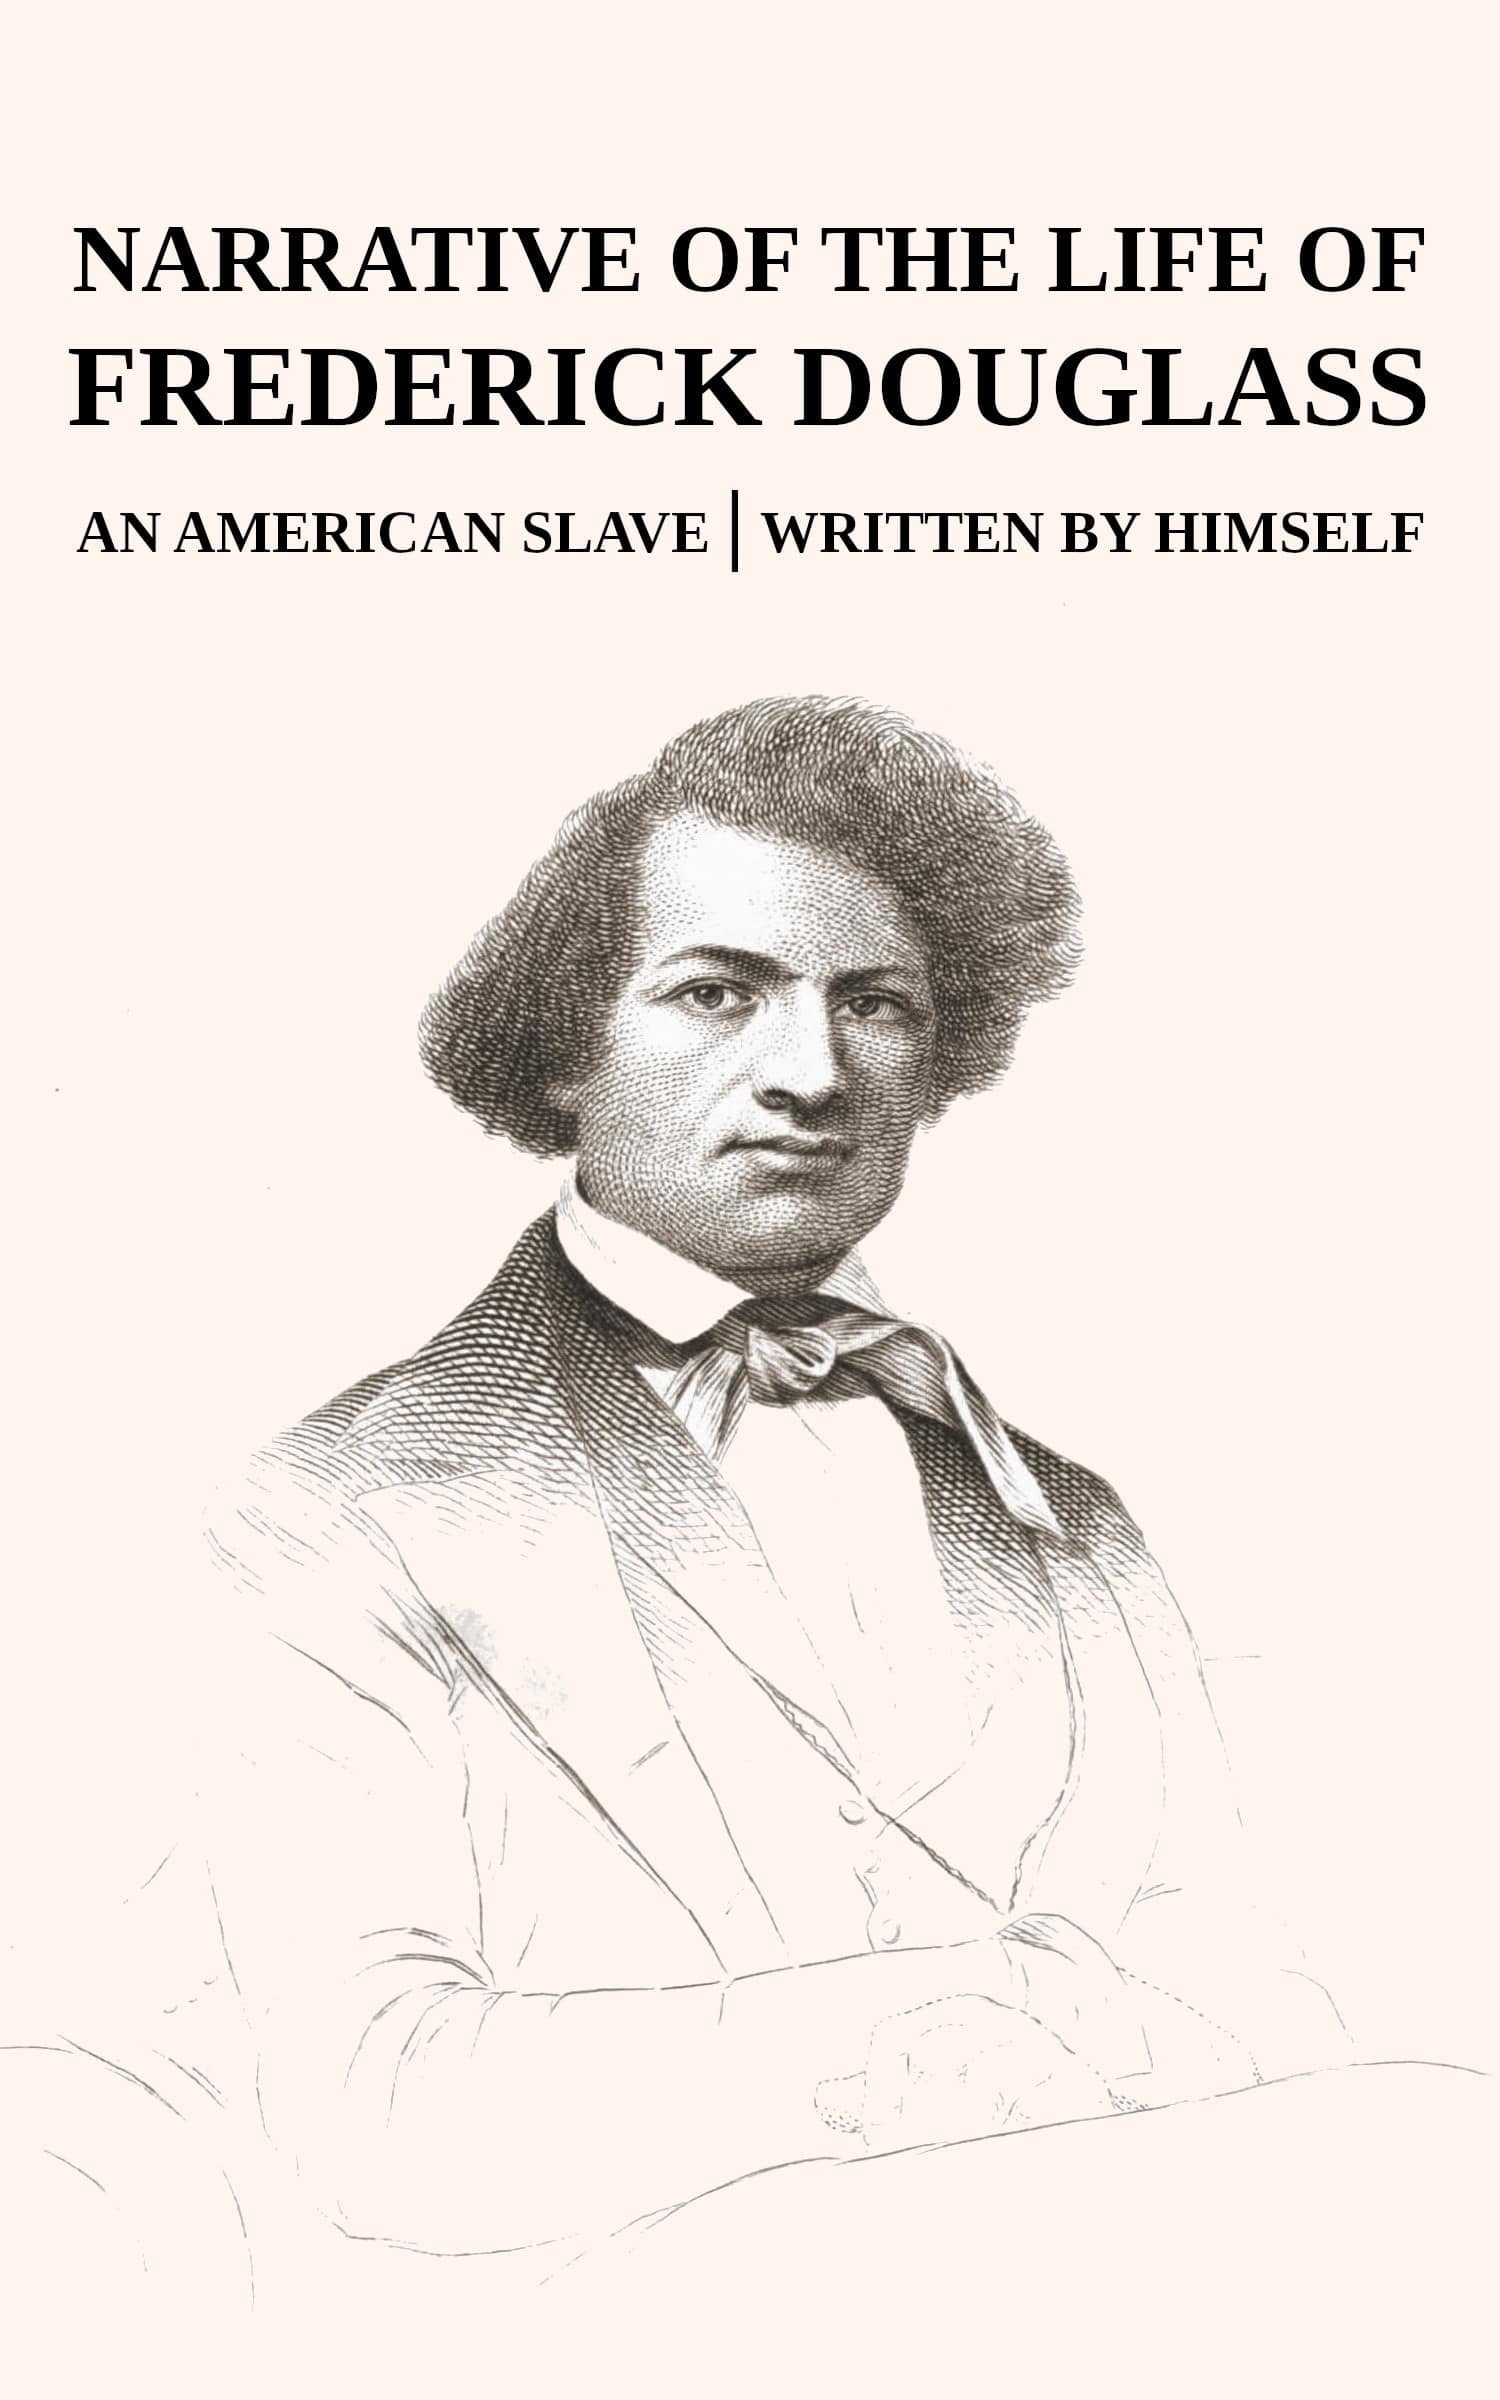 Cover for the Nantucket E-Book edition of Narrative of the Life of Frederick Douglass. The art is an engraved portrait of Frederick Douglass, taken from the first edition of the book, published in 1845. Cover by Nicholas Bernhard, licensed under Creative Commons Attribution 4.0 https://creativecommons.org/licenses/by/4.0/%0A